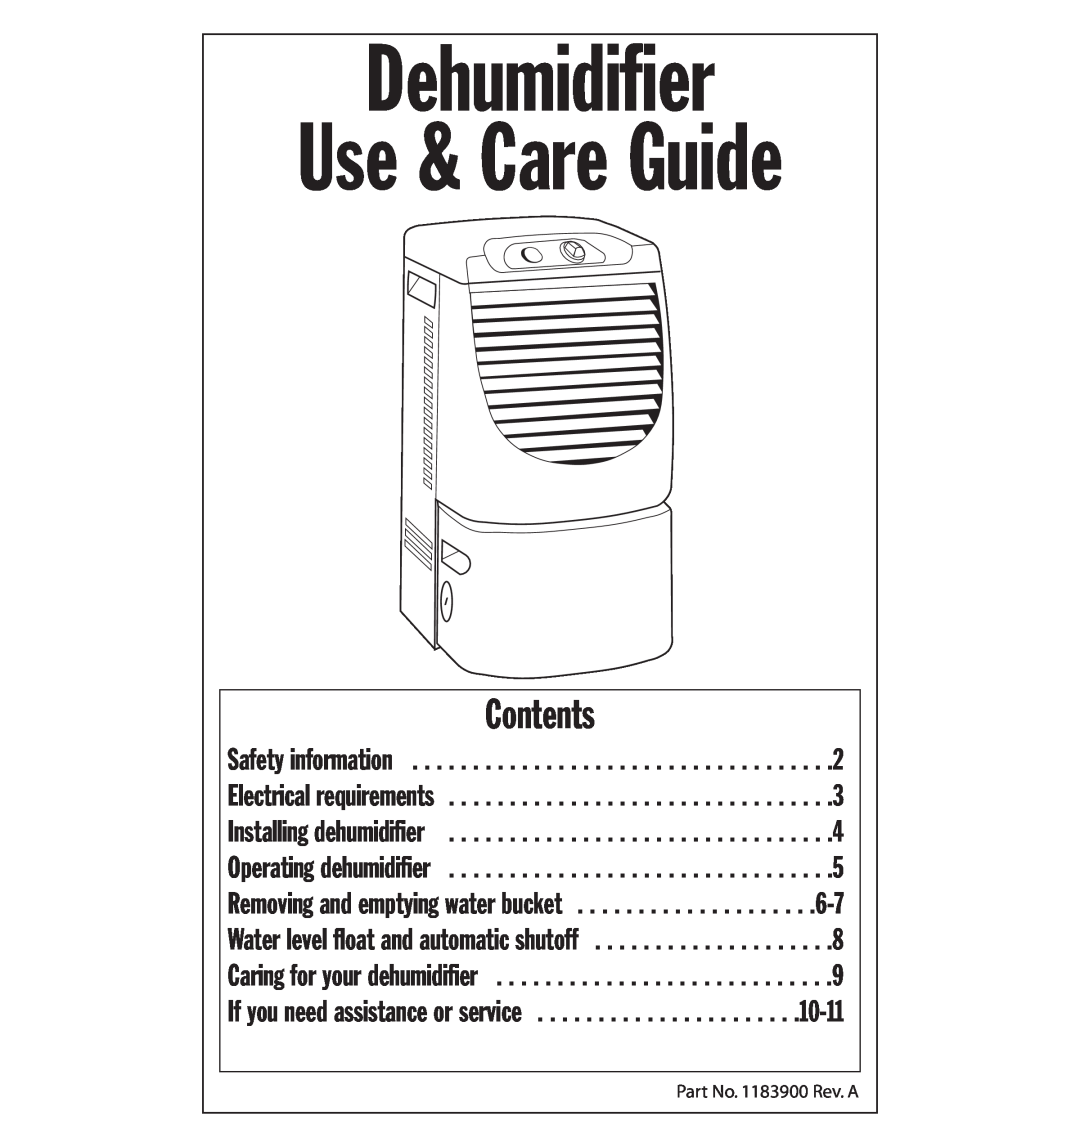 Whirlpool AD40LJ0 manual Contents, Dehumidifier Use & Care Guide 